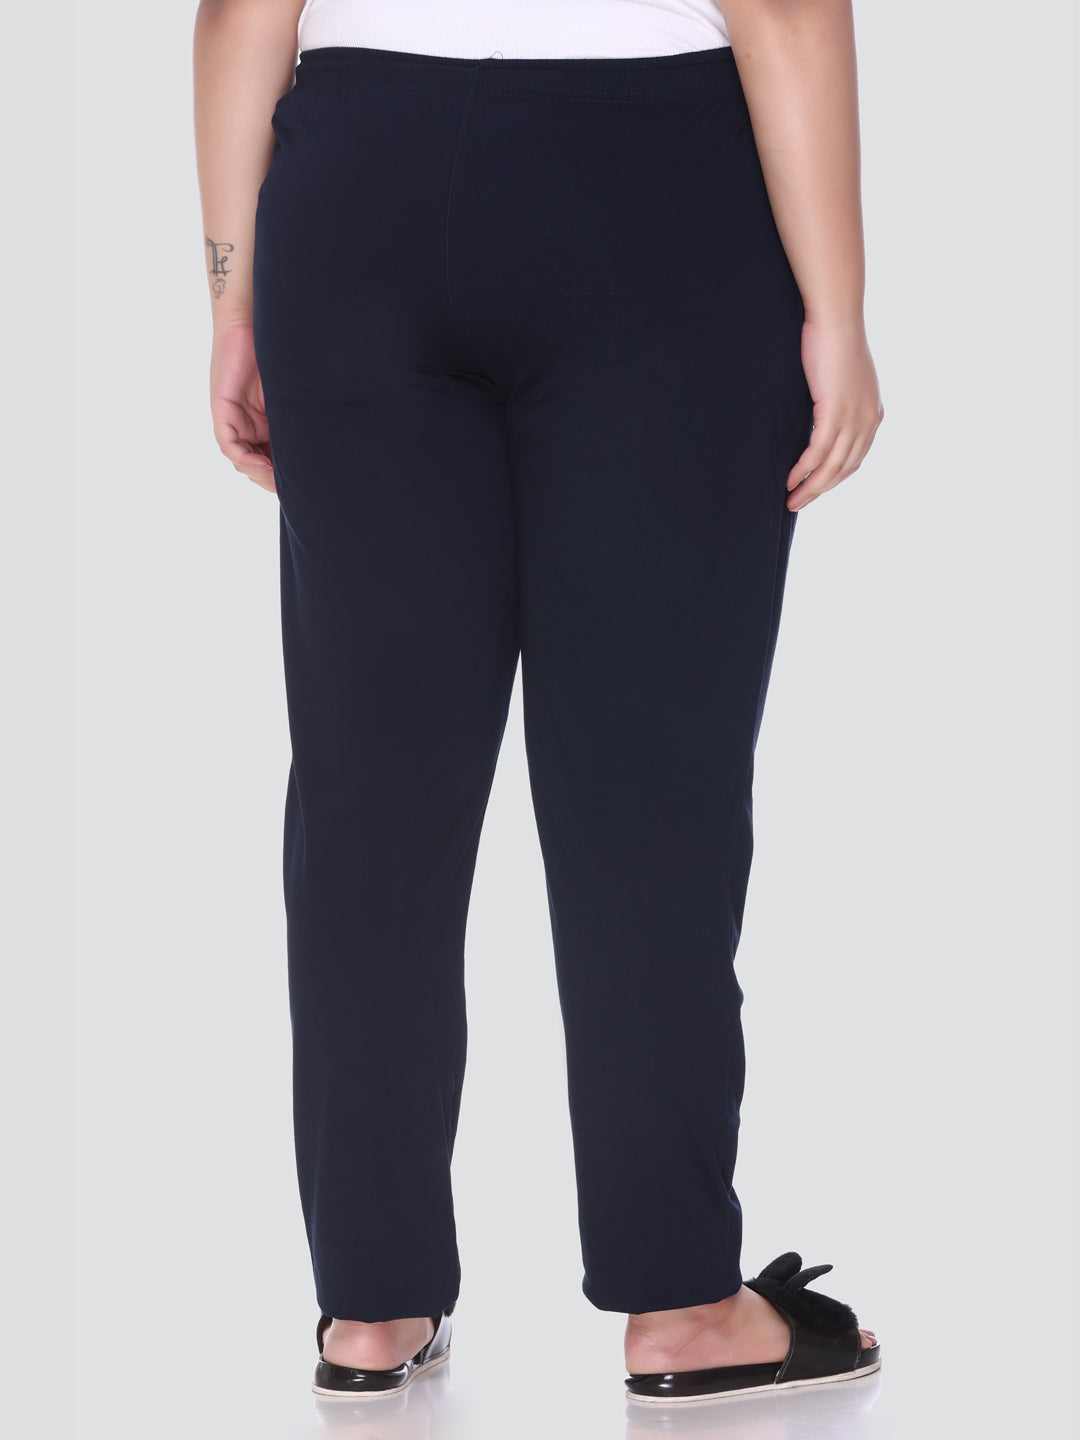 Go Colors Women Solid Navy Mid Rise Cotton Pants Buy Go Colors Women Solid  Navy Mid Rise Cotton Pants Online at Best Price in India  Nykaa